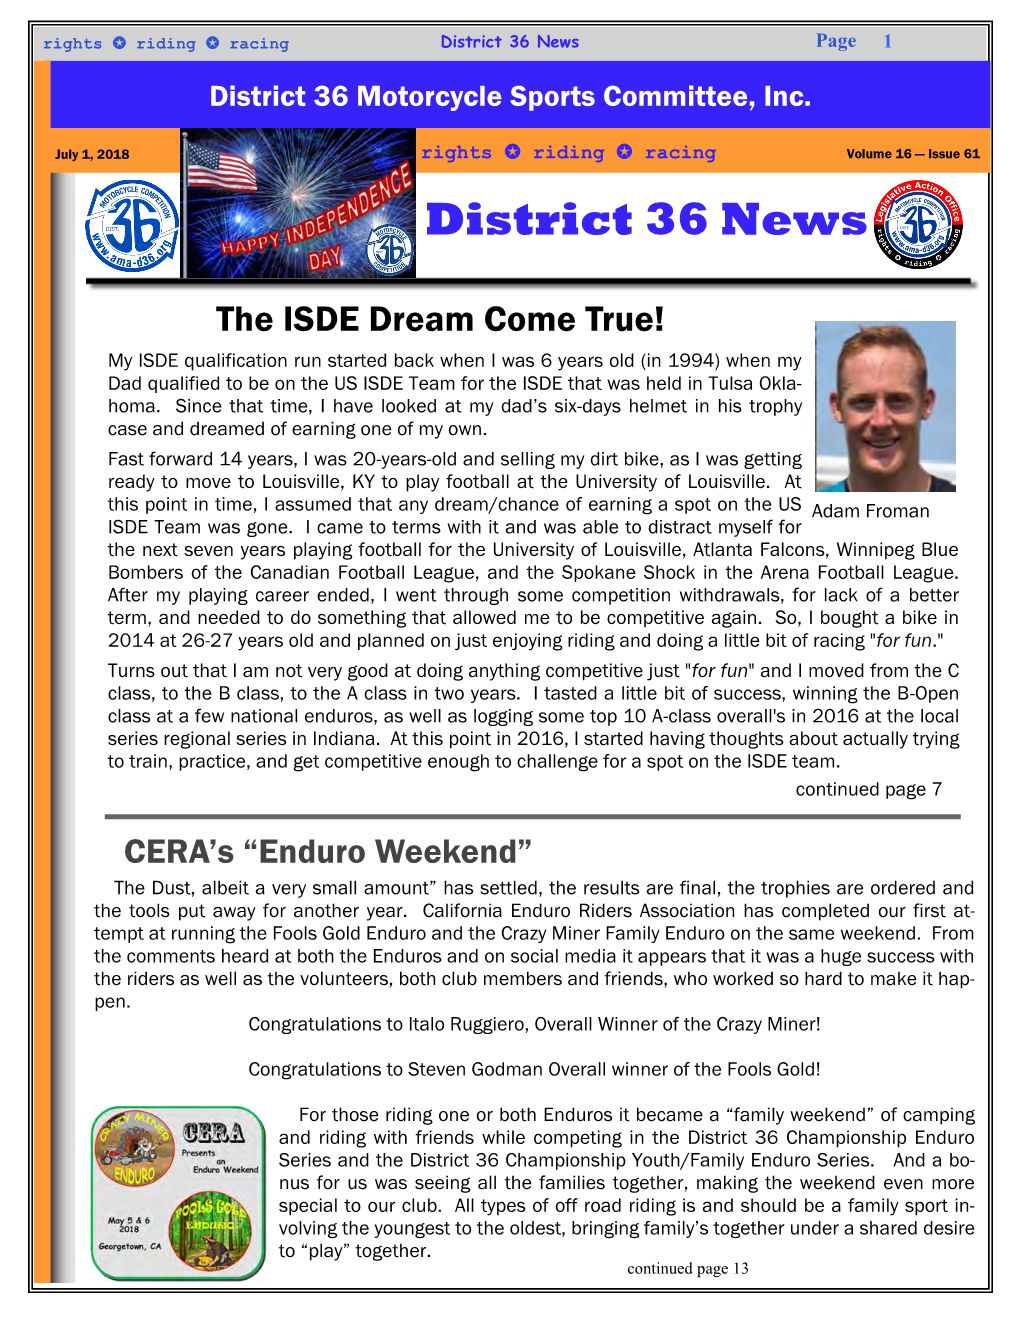 District 36 News Page 1 District 36 Motorcycle Sports Committee, Inc